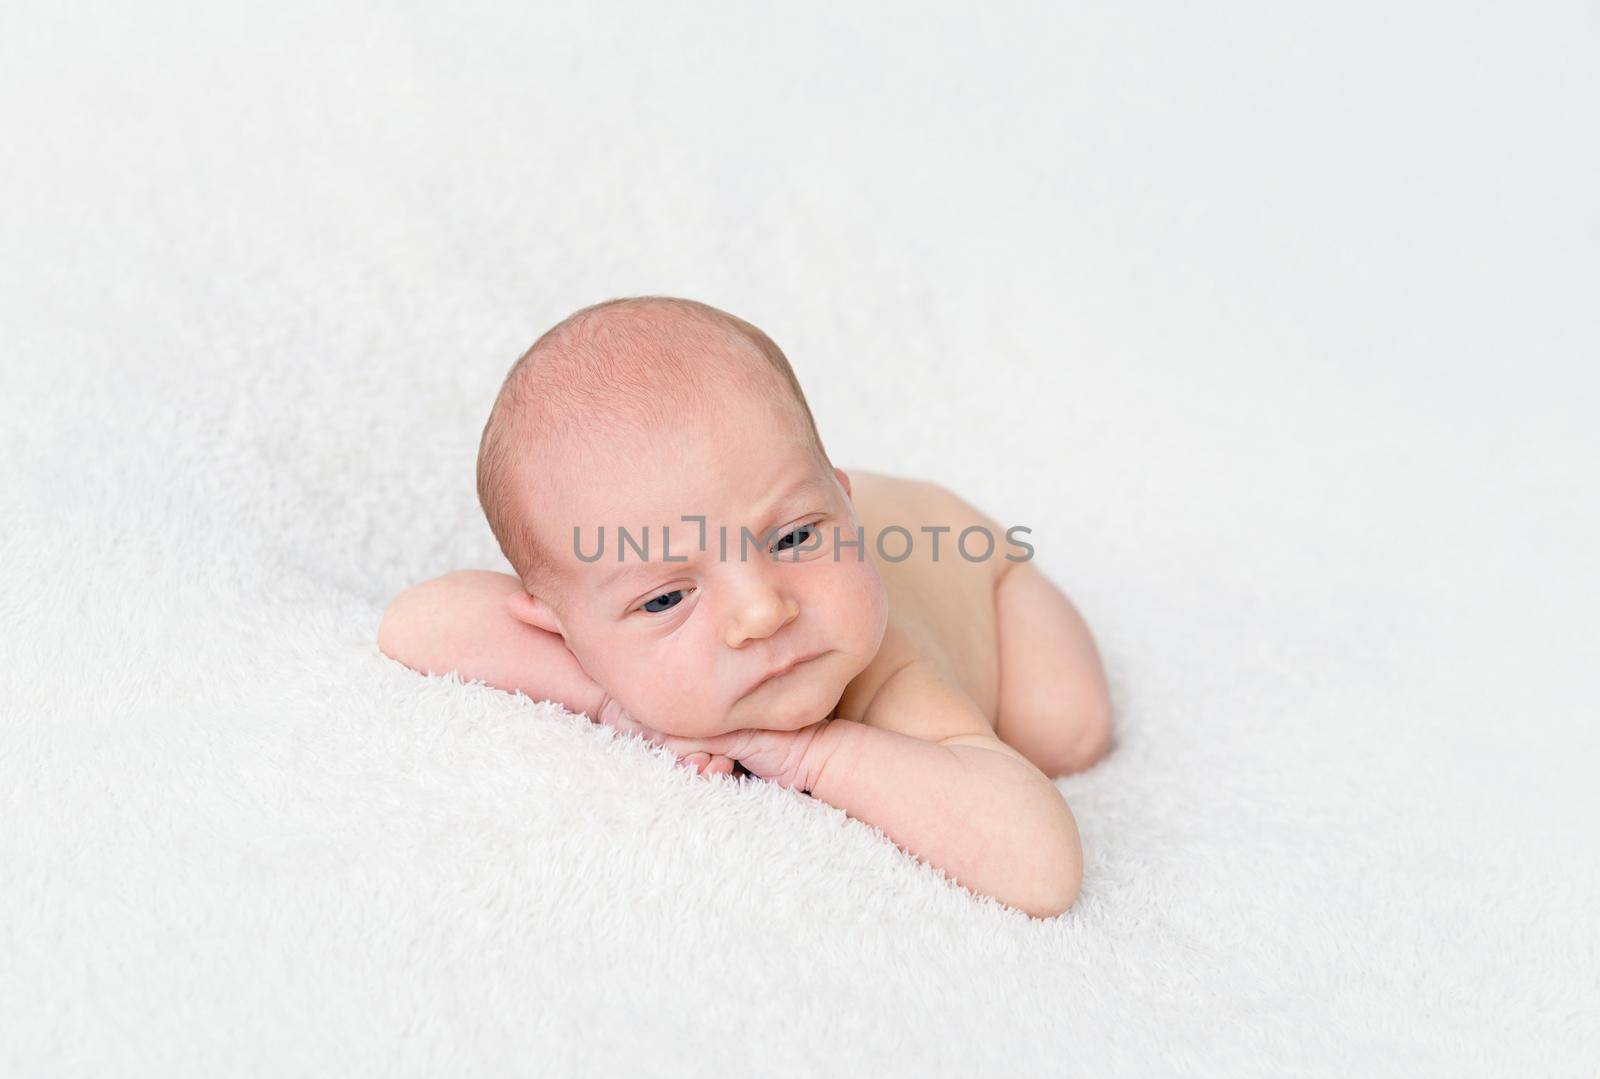 Tender newborn baby boy lying on a white blanket with his head on his hands. Newborn baby looking at camera